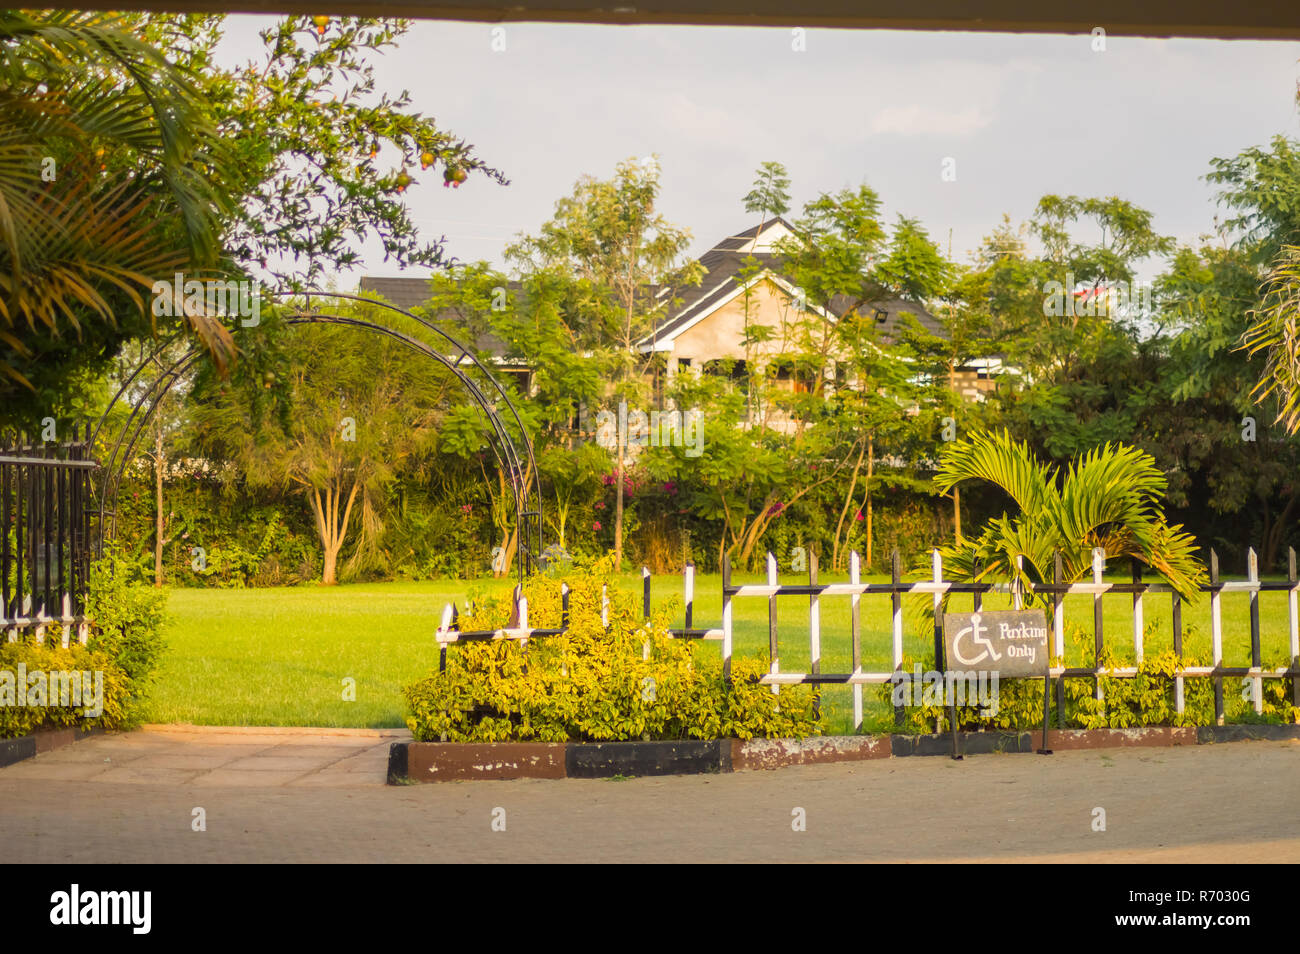 Entrance to a flower park with a barrier and an ark in the city of Nairobi Stock Photo